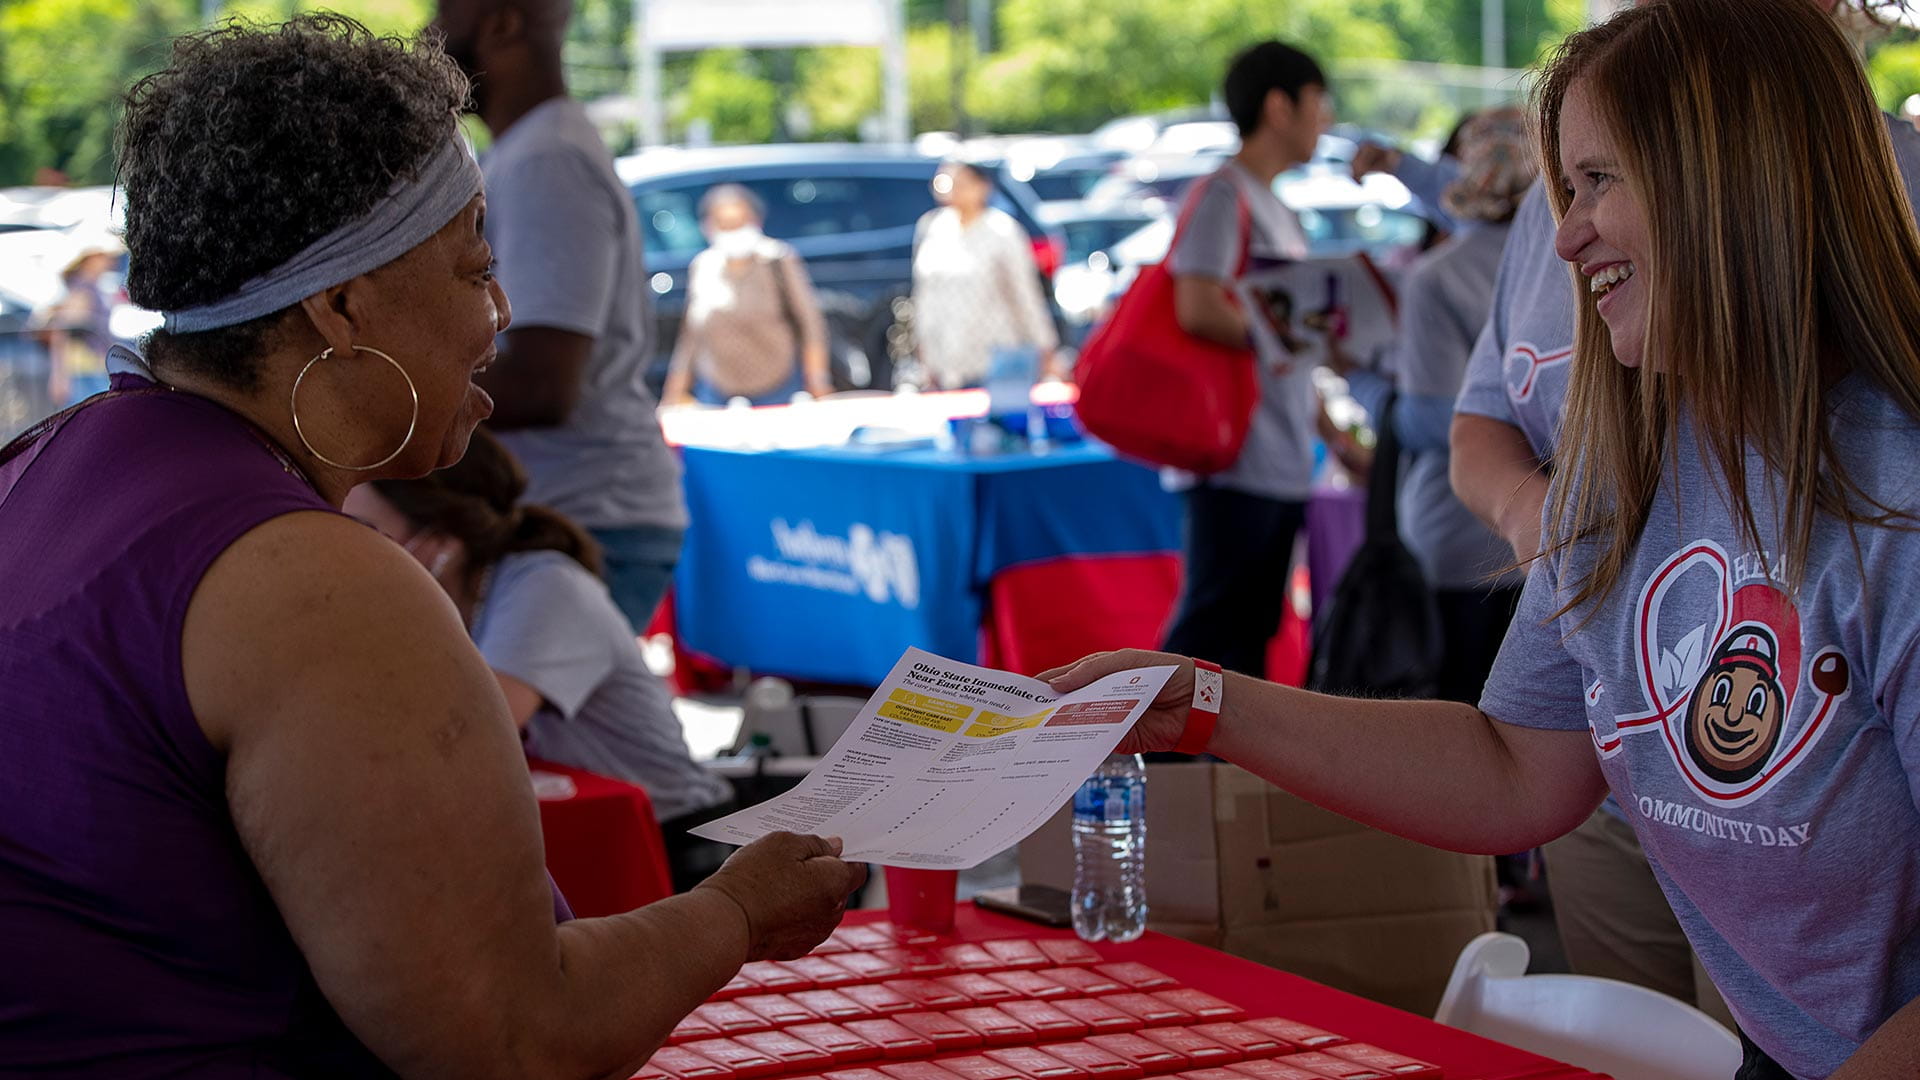 Ohio State volunteer talking to a woman